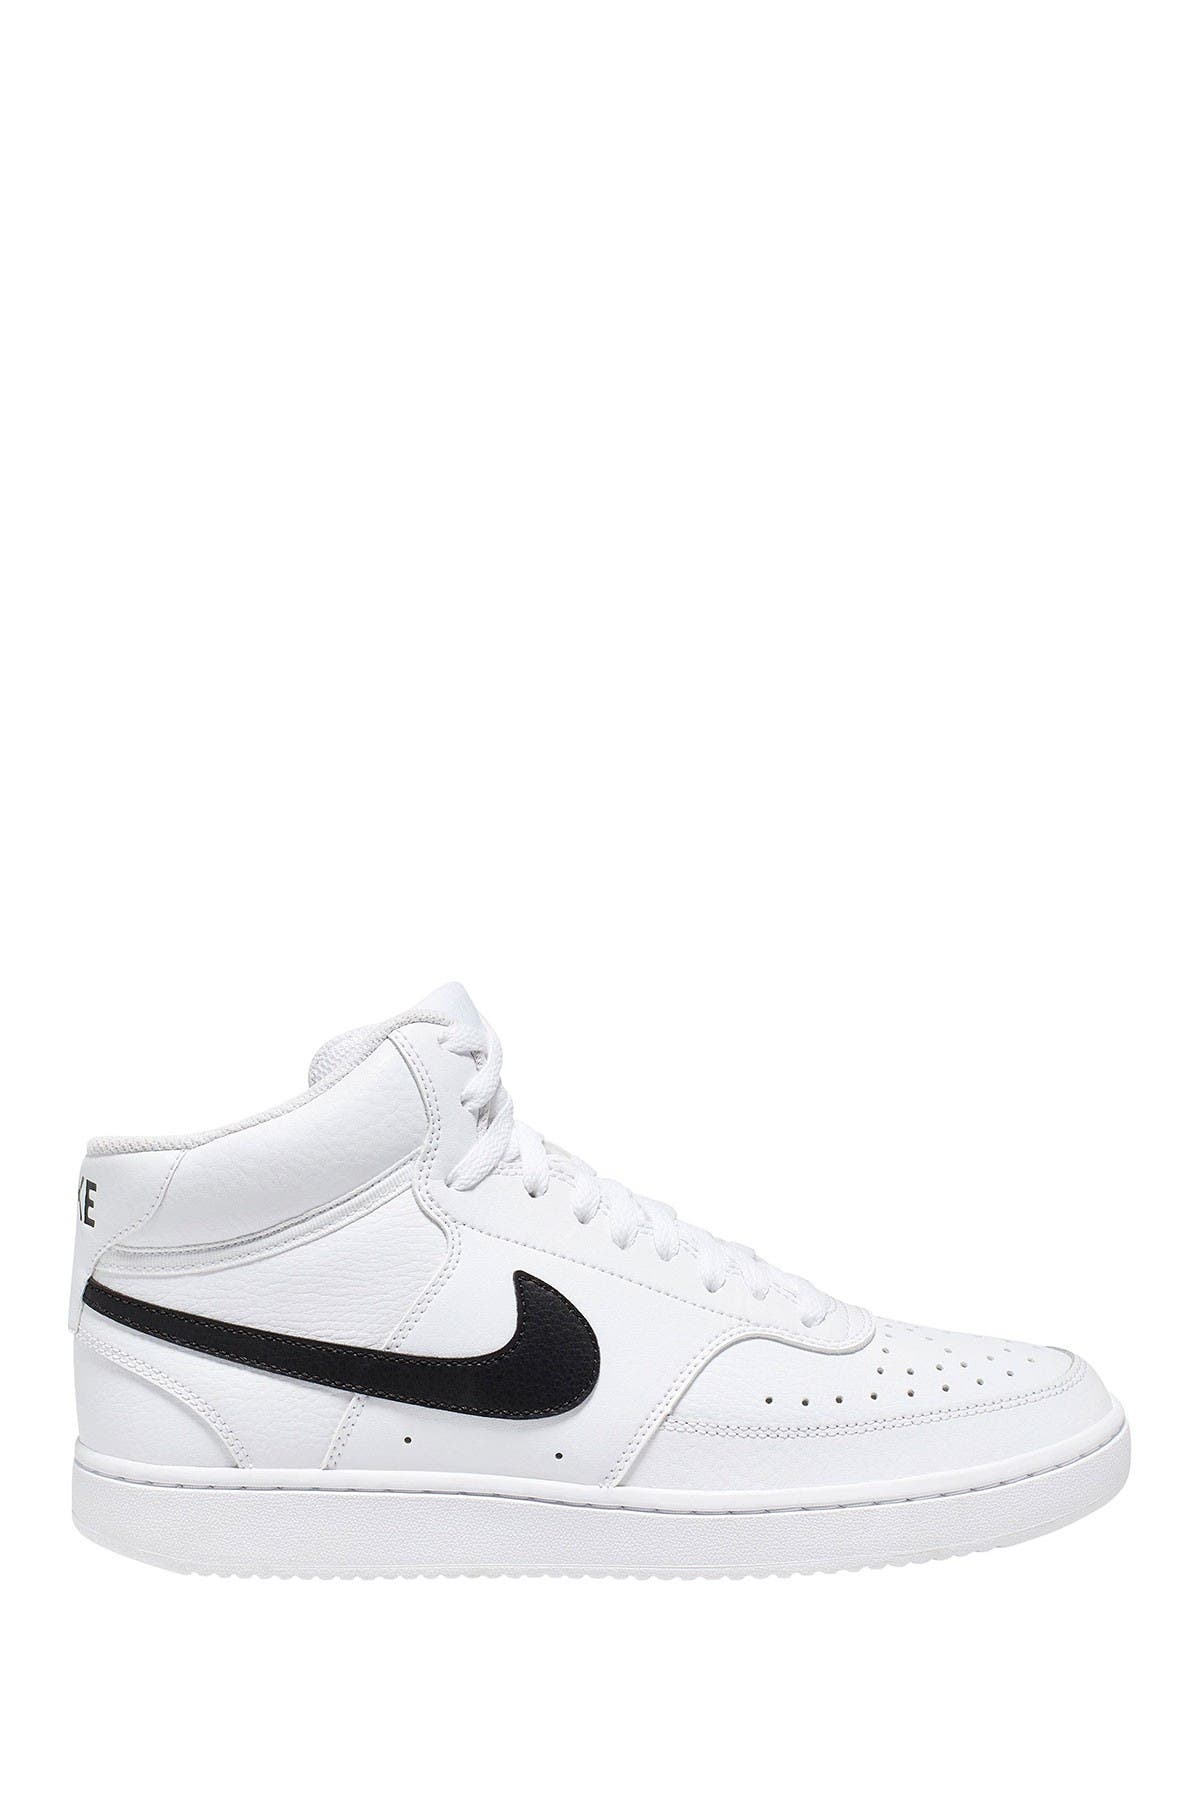 NIKE COURT ROYALE MID SNEAKER,193154116977